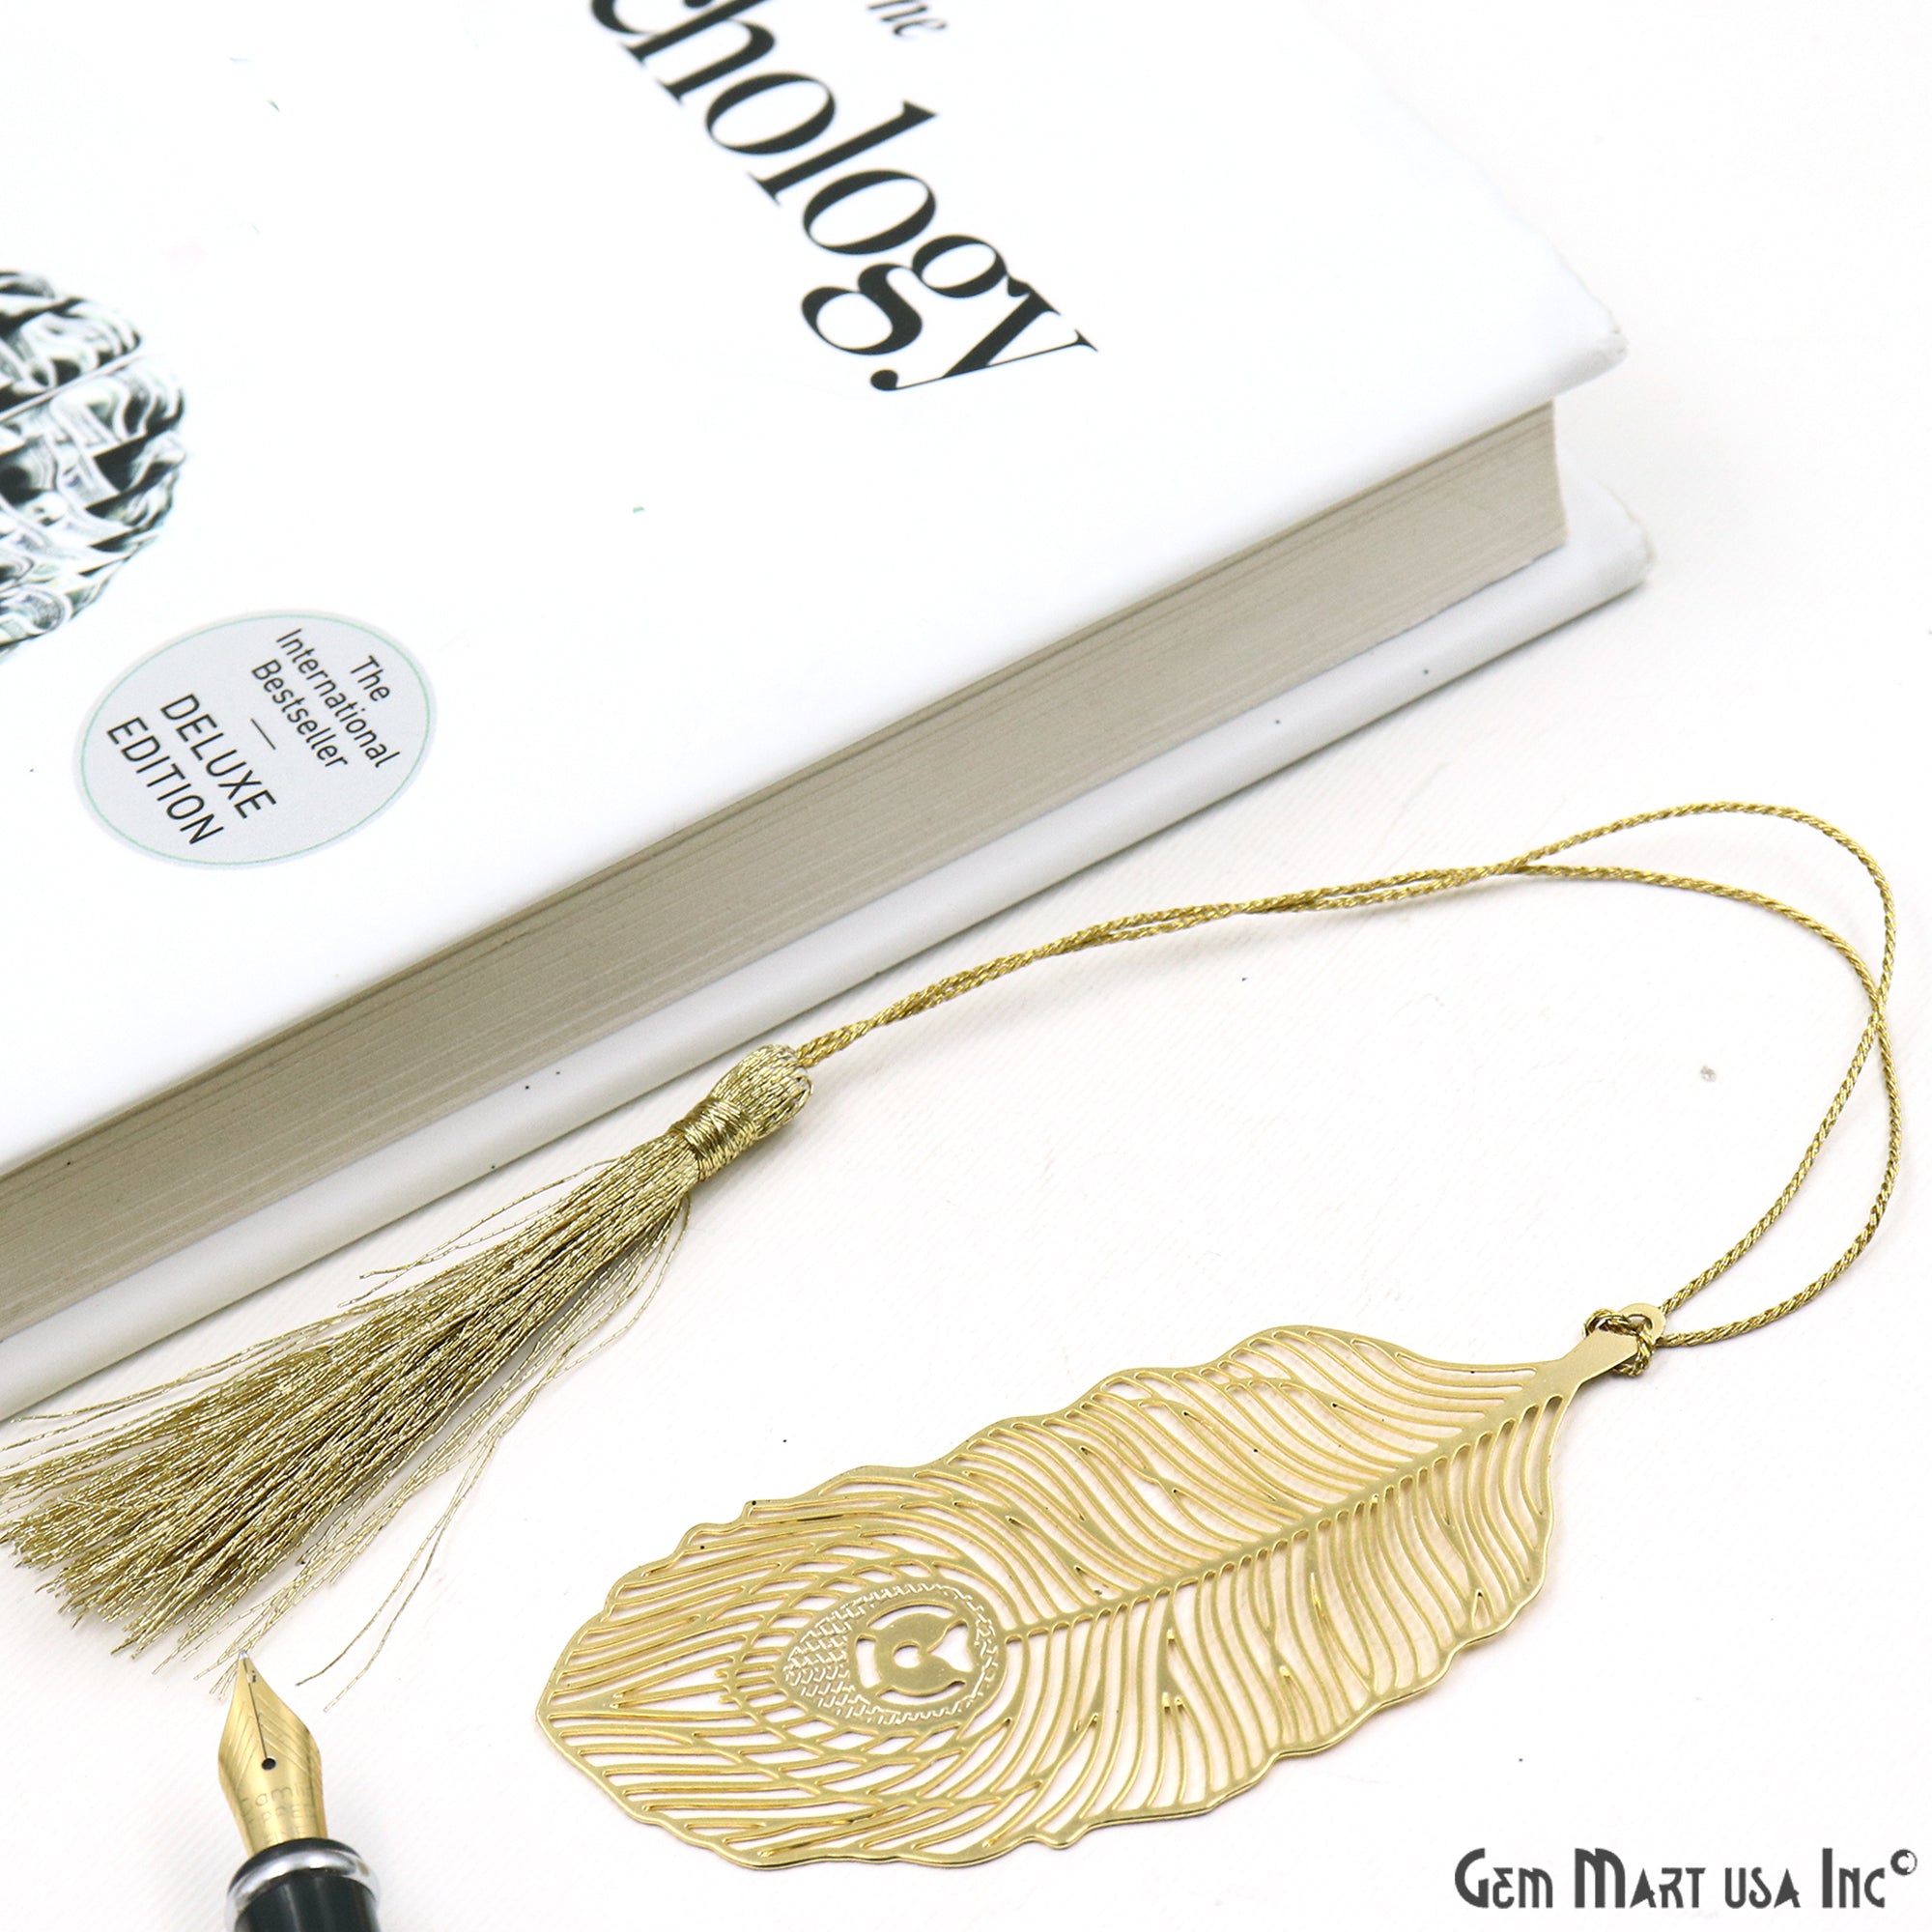 Metal Feather Bookmark With Tassel. Gold Bookmark, Reader Gift, Handmade Bookmark, Page Marker, Aesthetic Gift. 84x36mm